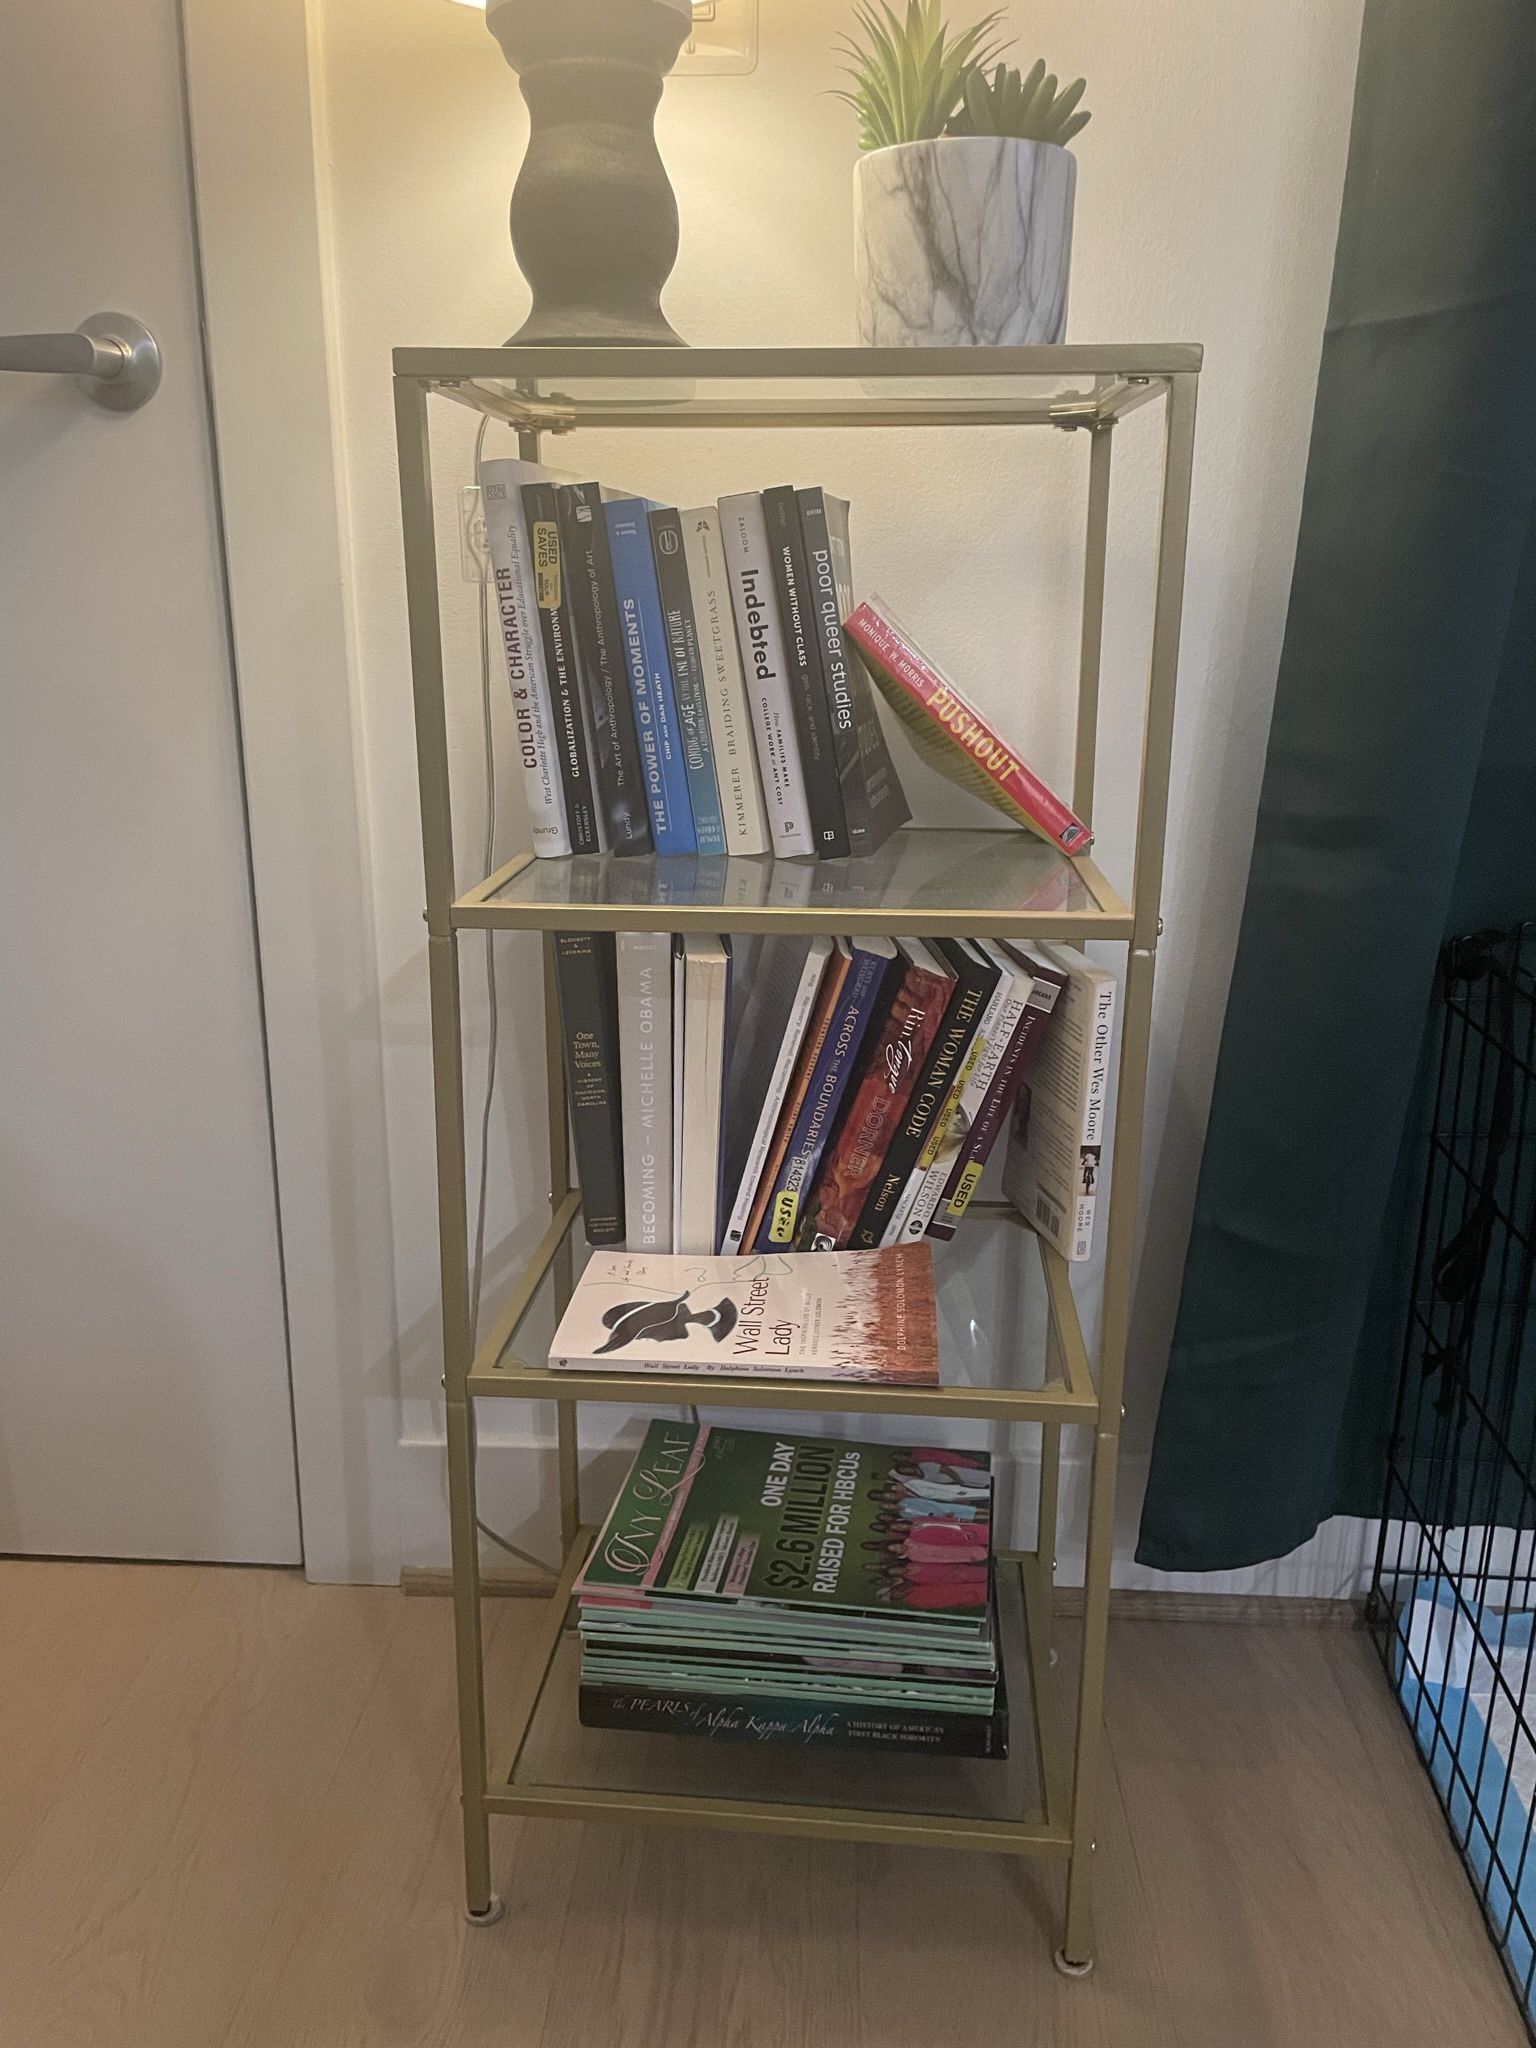 GOLD AND GLASS STAINLESS STEEL BOOKCASE